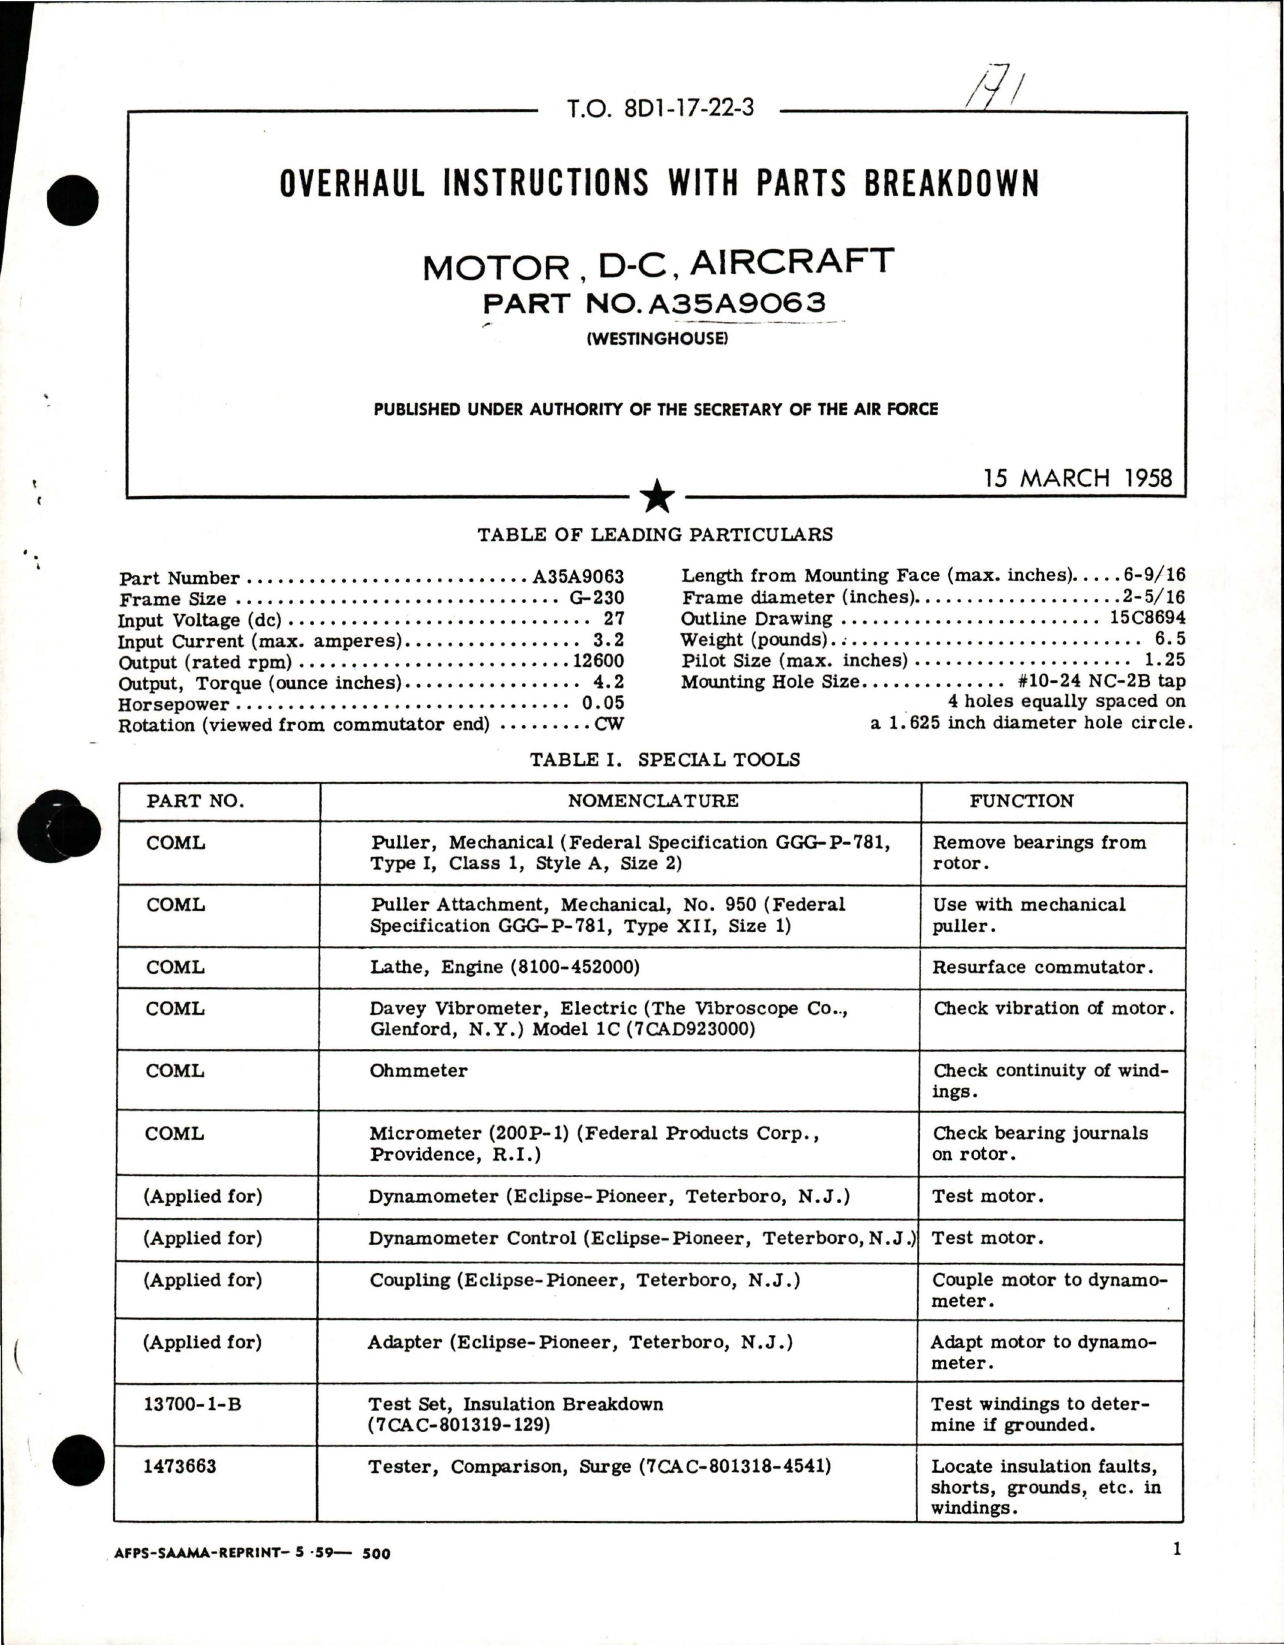 Sample page 1 from AirCorps Library document: Overhaul Instructions with Parts Breakdown for DC Motor - Part A35A9063